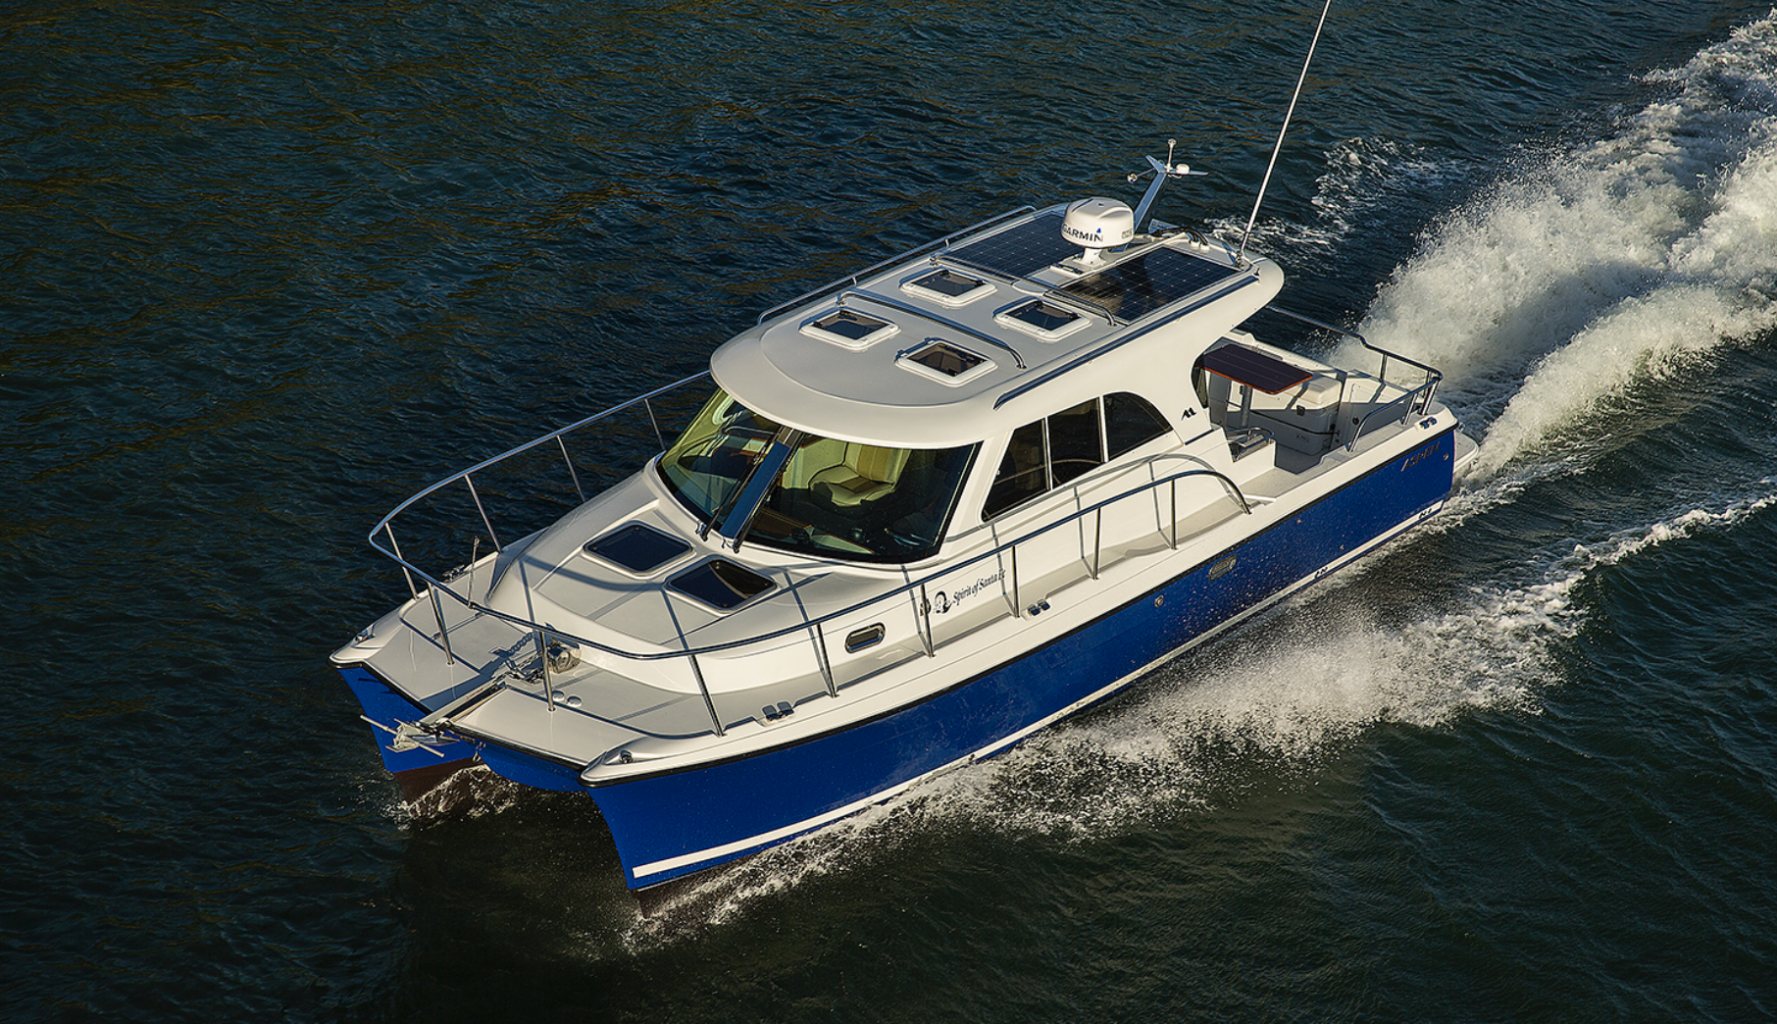 YANMAR 4LV250 engine and Aspen Power Catamarans C100 aim to redefine efficiency and performance in the power catamaran industry.